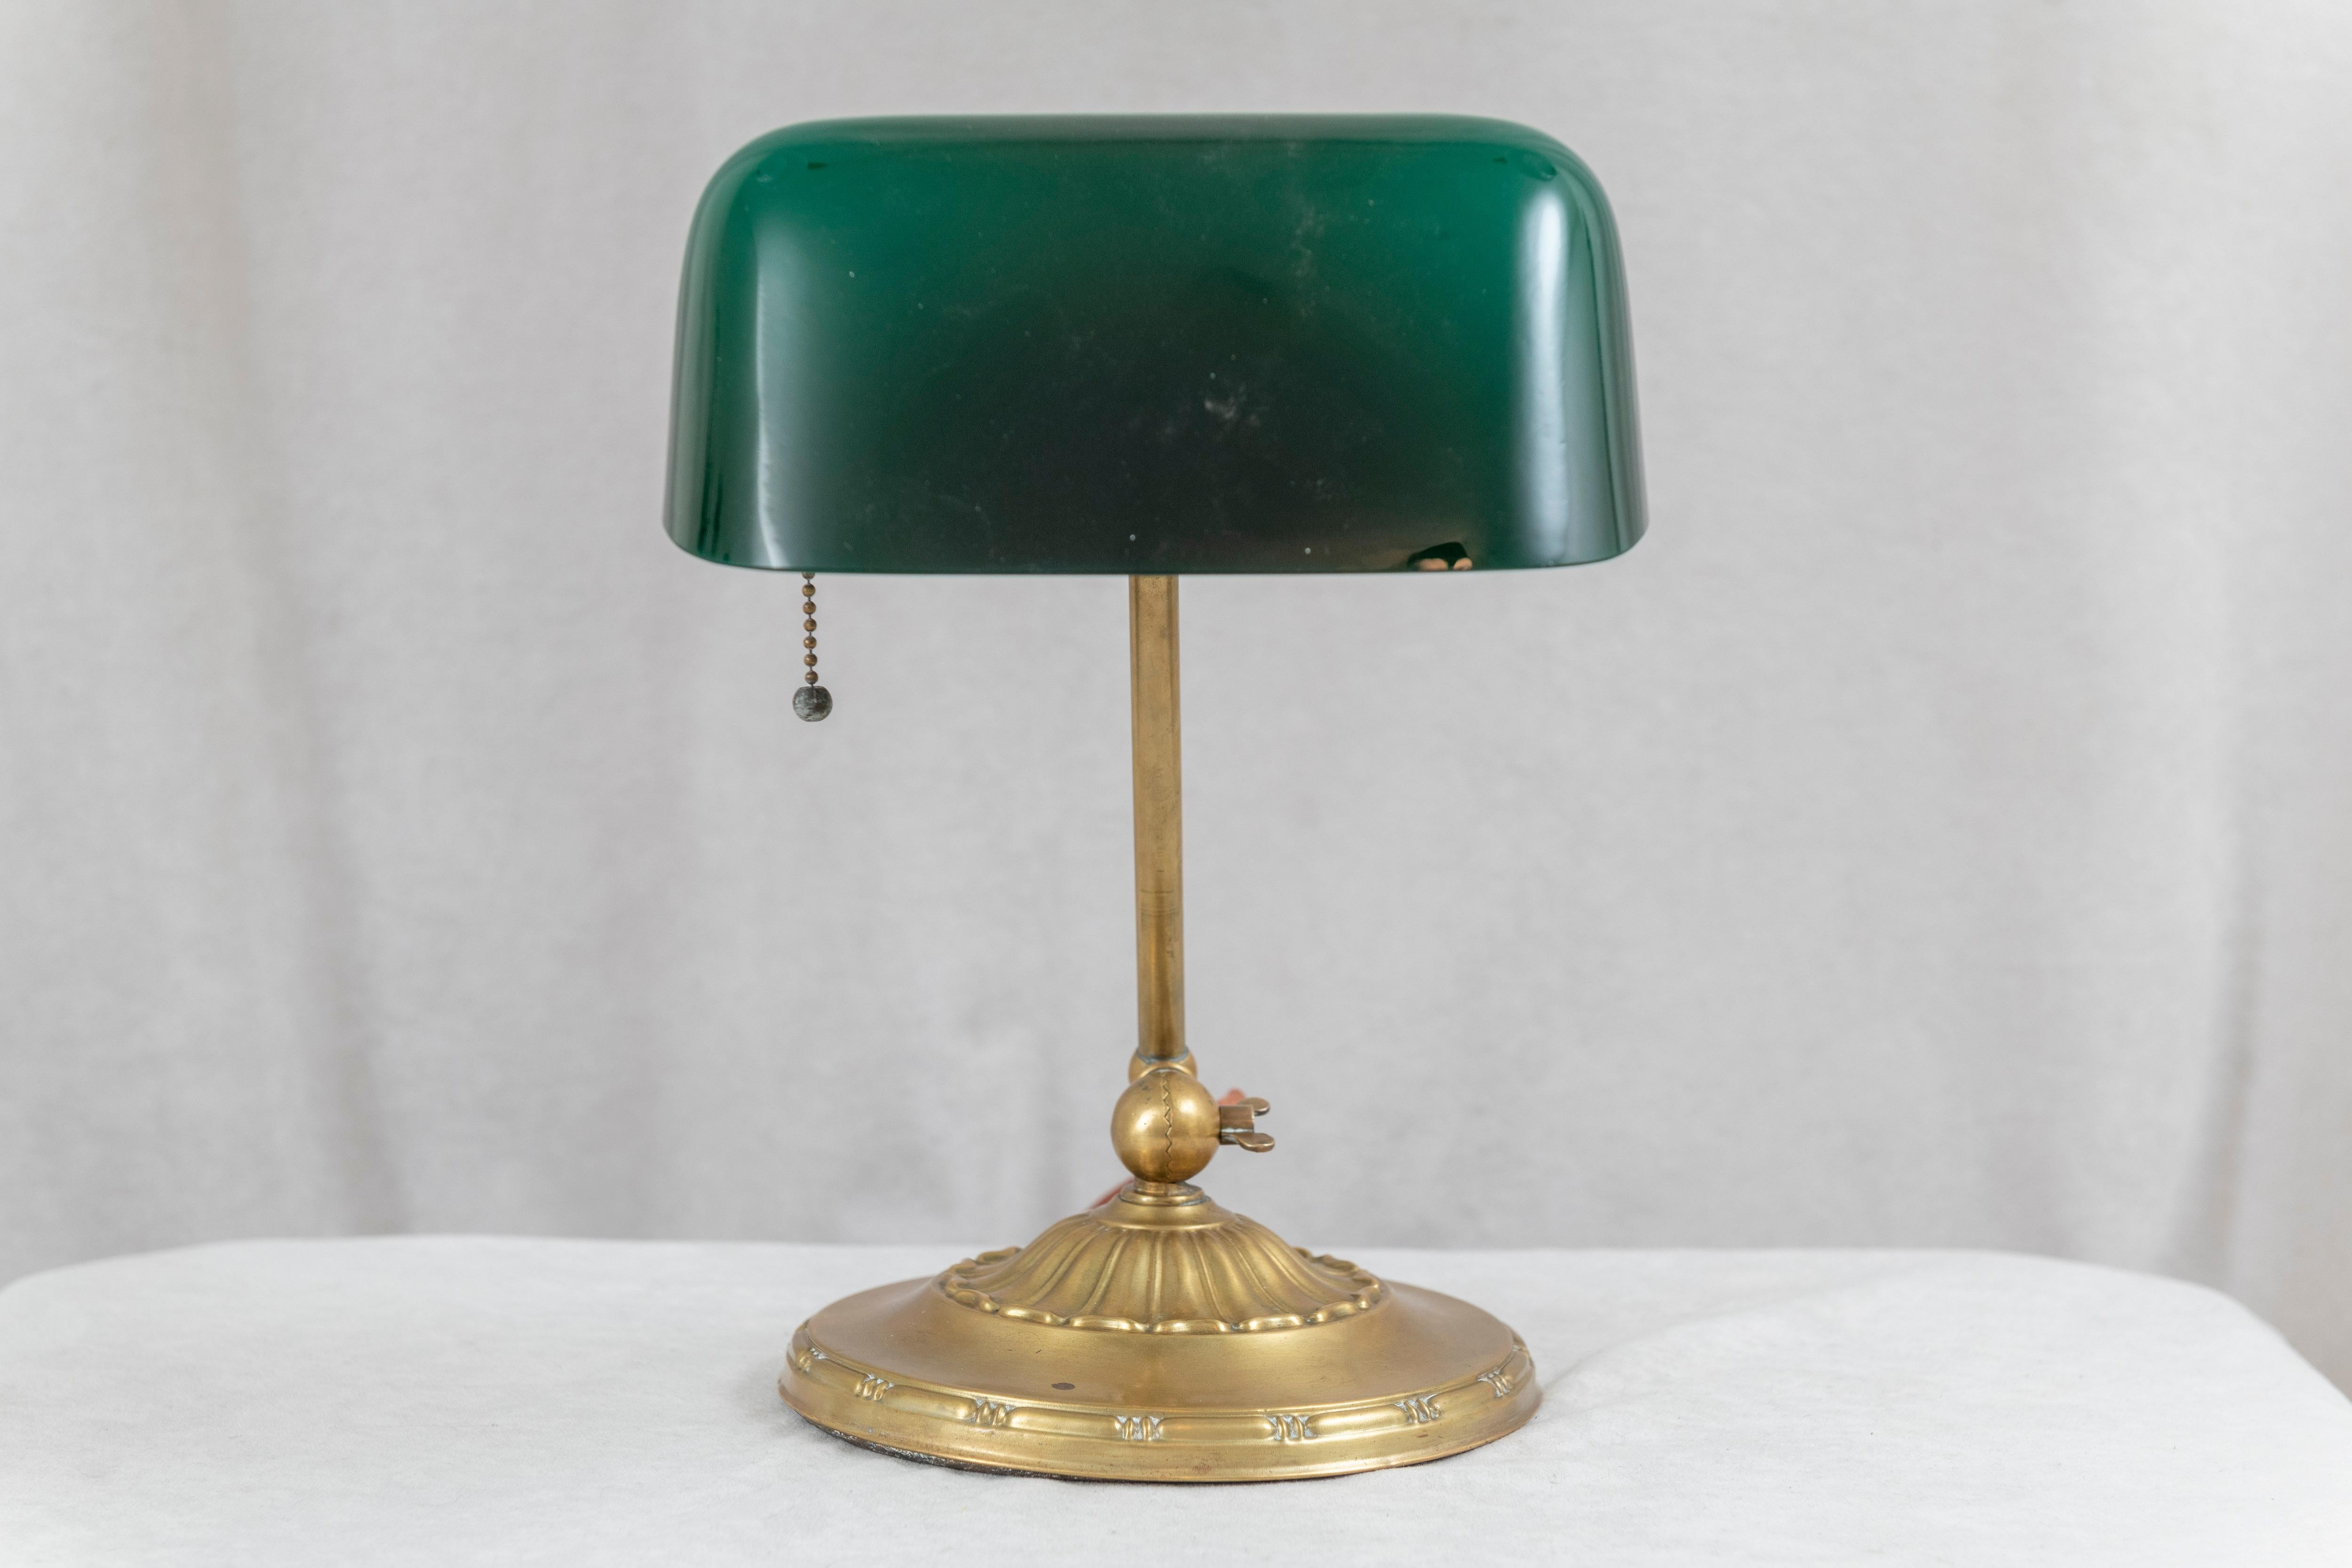 Emeralite Green Shade Banker's Lamp, ca. 1917 For Sale 3